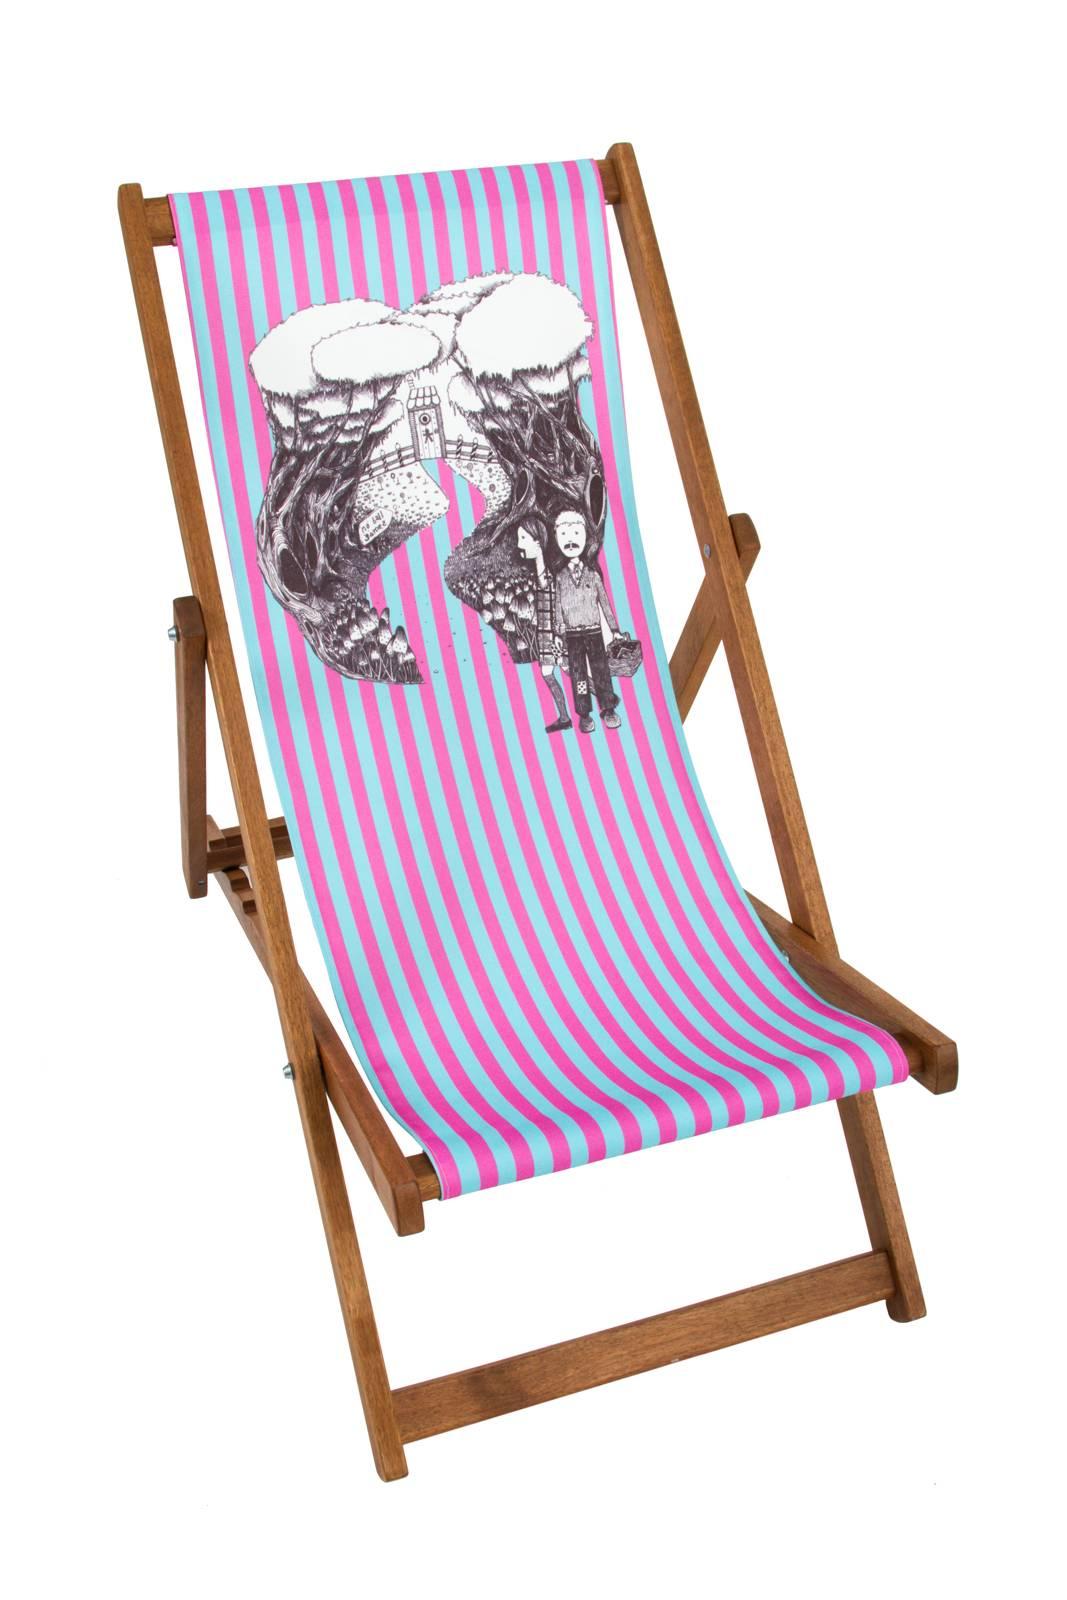 Folding chair by Fashion designer Alexander McQueen 
Screen printed on outdoor fabric with wood support 
2007, edition of 250
Commissioned for the Royal Parks Foundation 

Adjustable indoor/outdoor lounge chair.